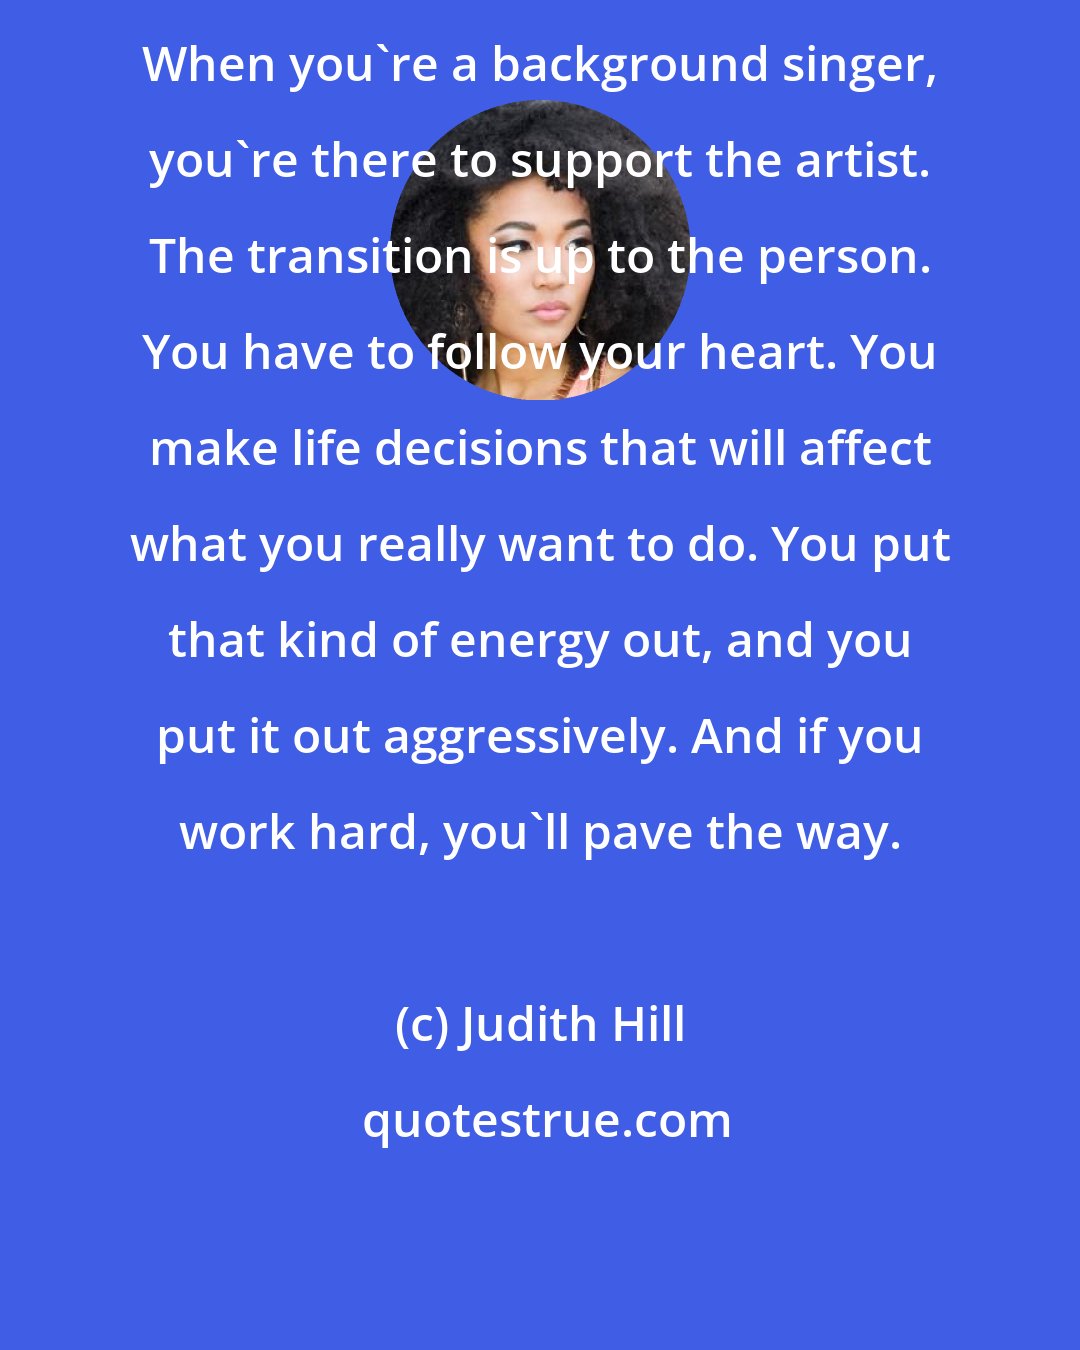 Judith Hill: When you're a background singer, you're there to support the artist. The transition is up to the person. You have to follow your heart. You make life decisions that will affect what you really want to do. You put that kind of energy out, and you put it out aggressively. And if you work hard, you'll pave the way.